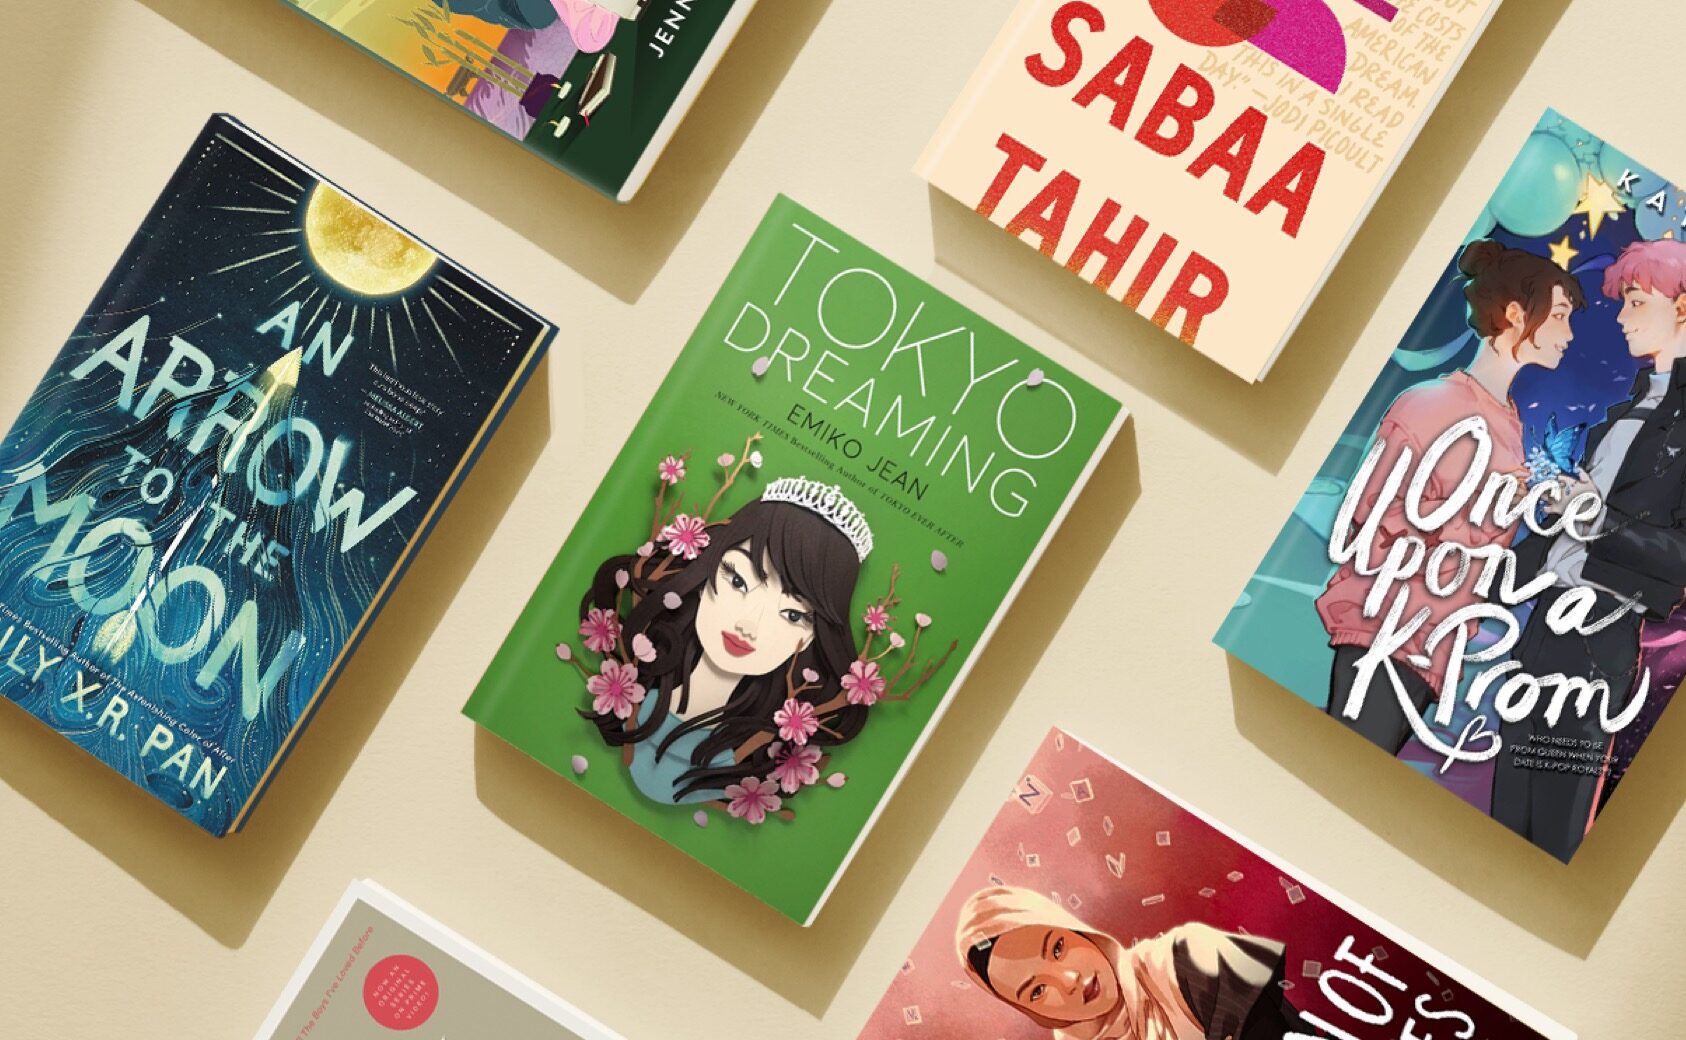 Pan-Asian Heritage Month. Discover unputdownable reads from Asian and Pacific Islander authors, including fan-favourite YA series, rom-coms, and more.